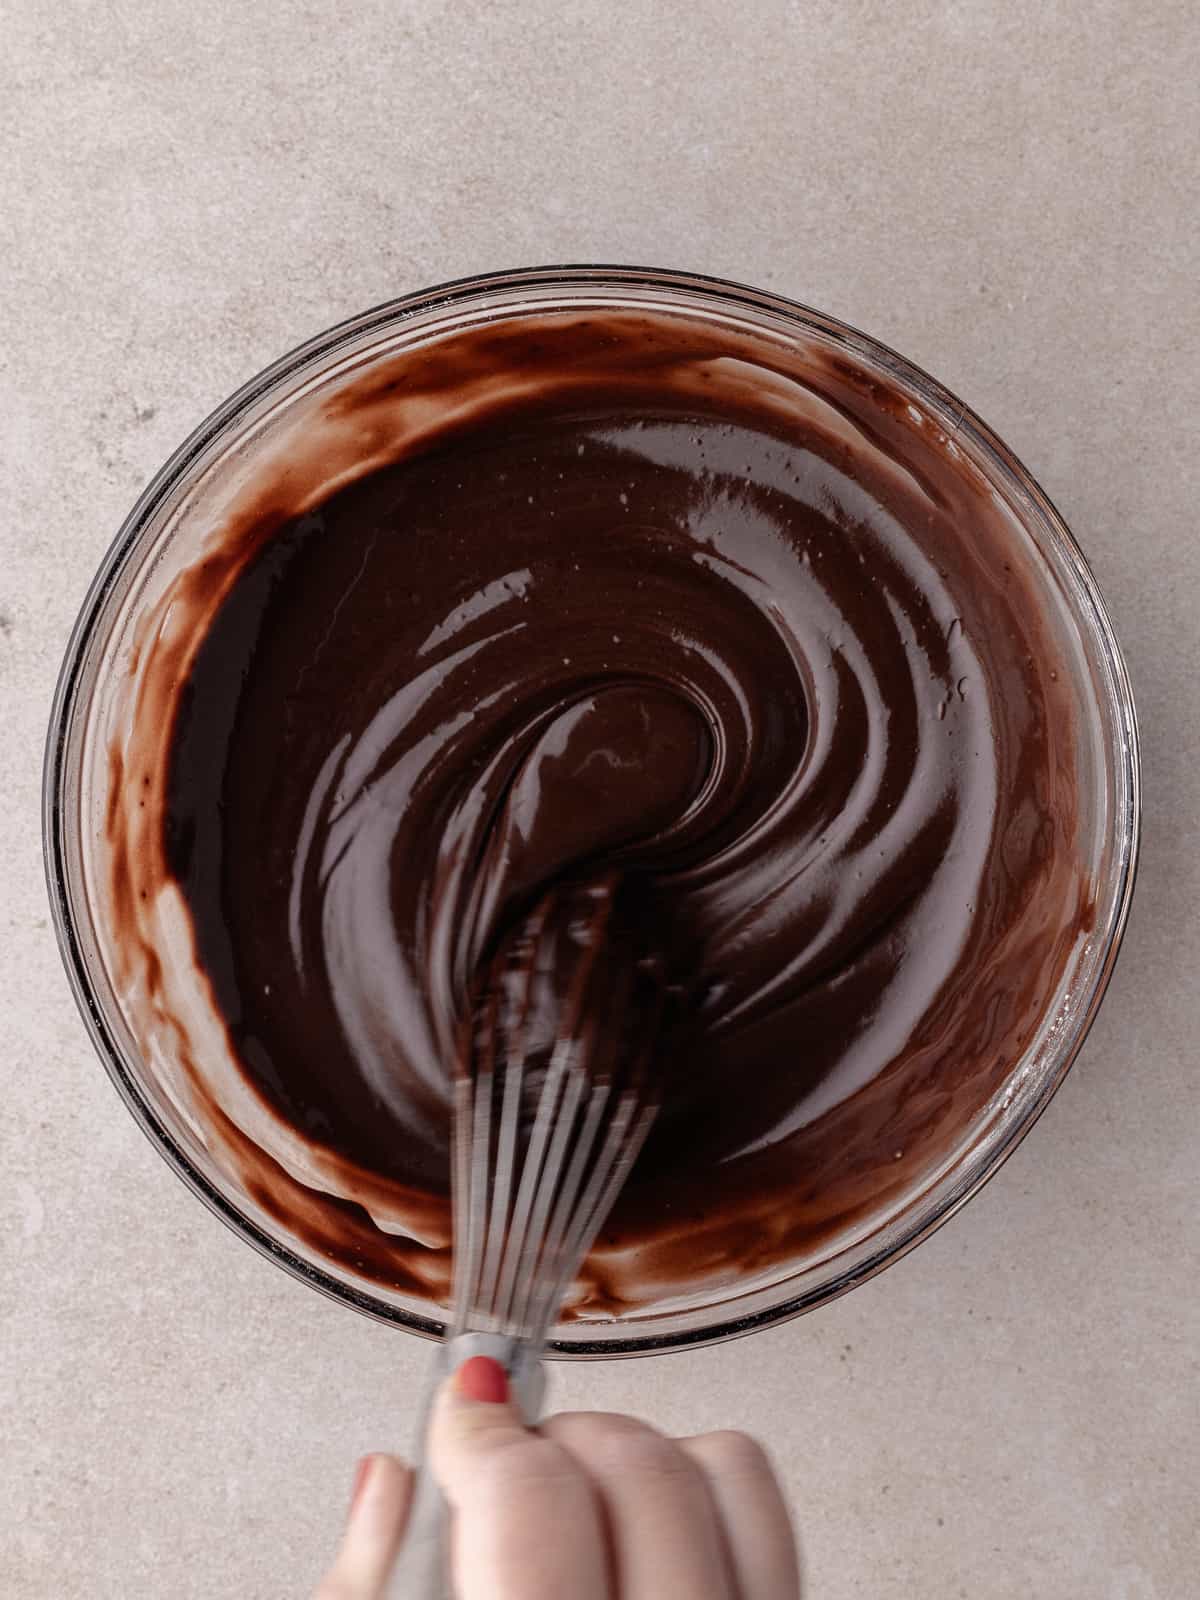 Chocolate is being whisked in a medium bowl.